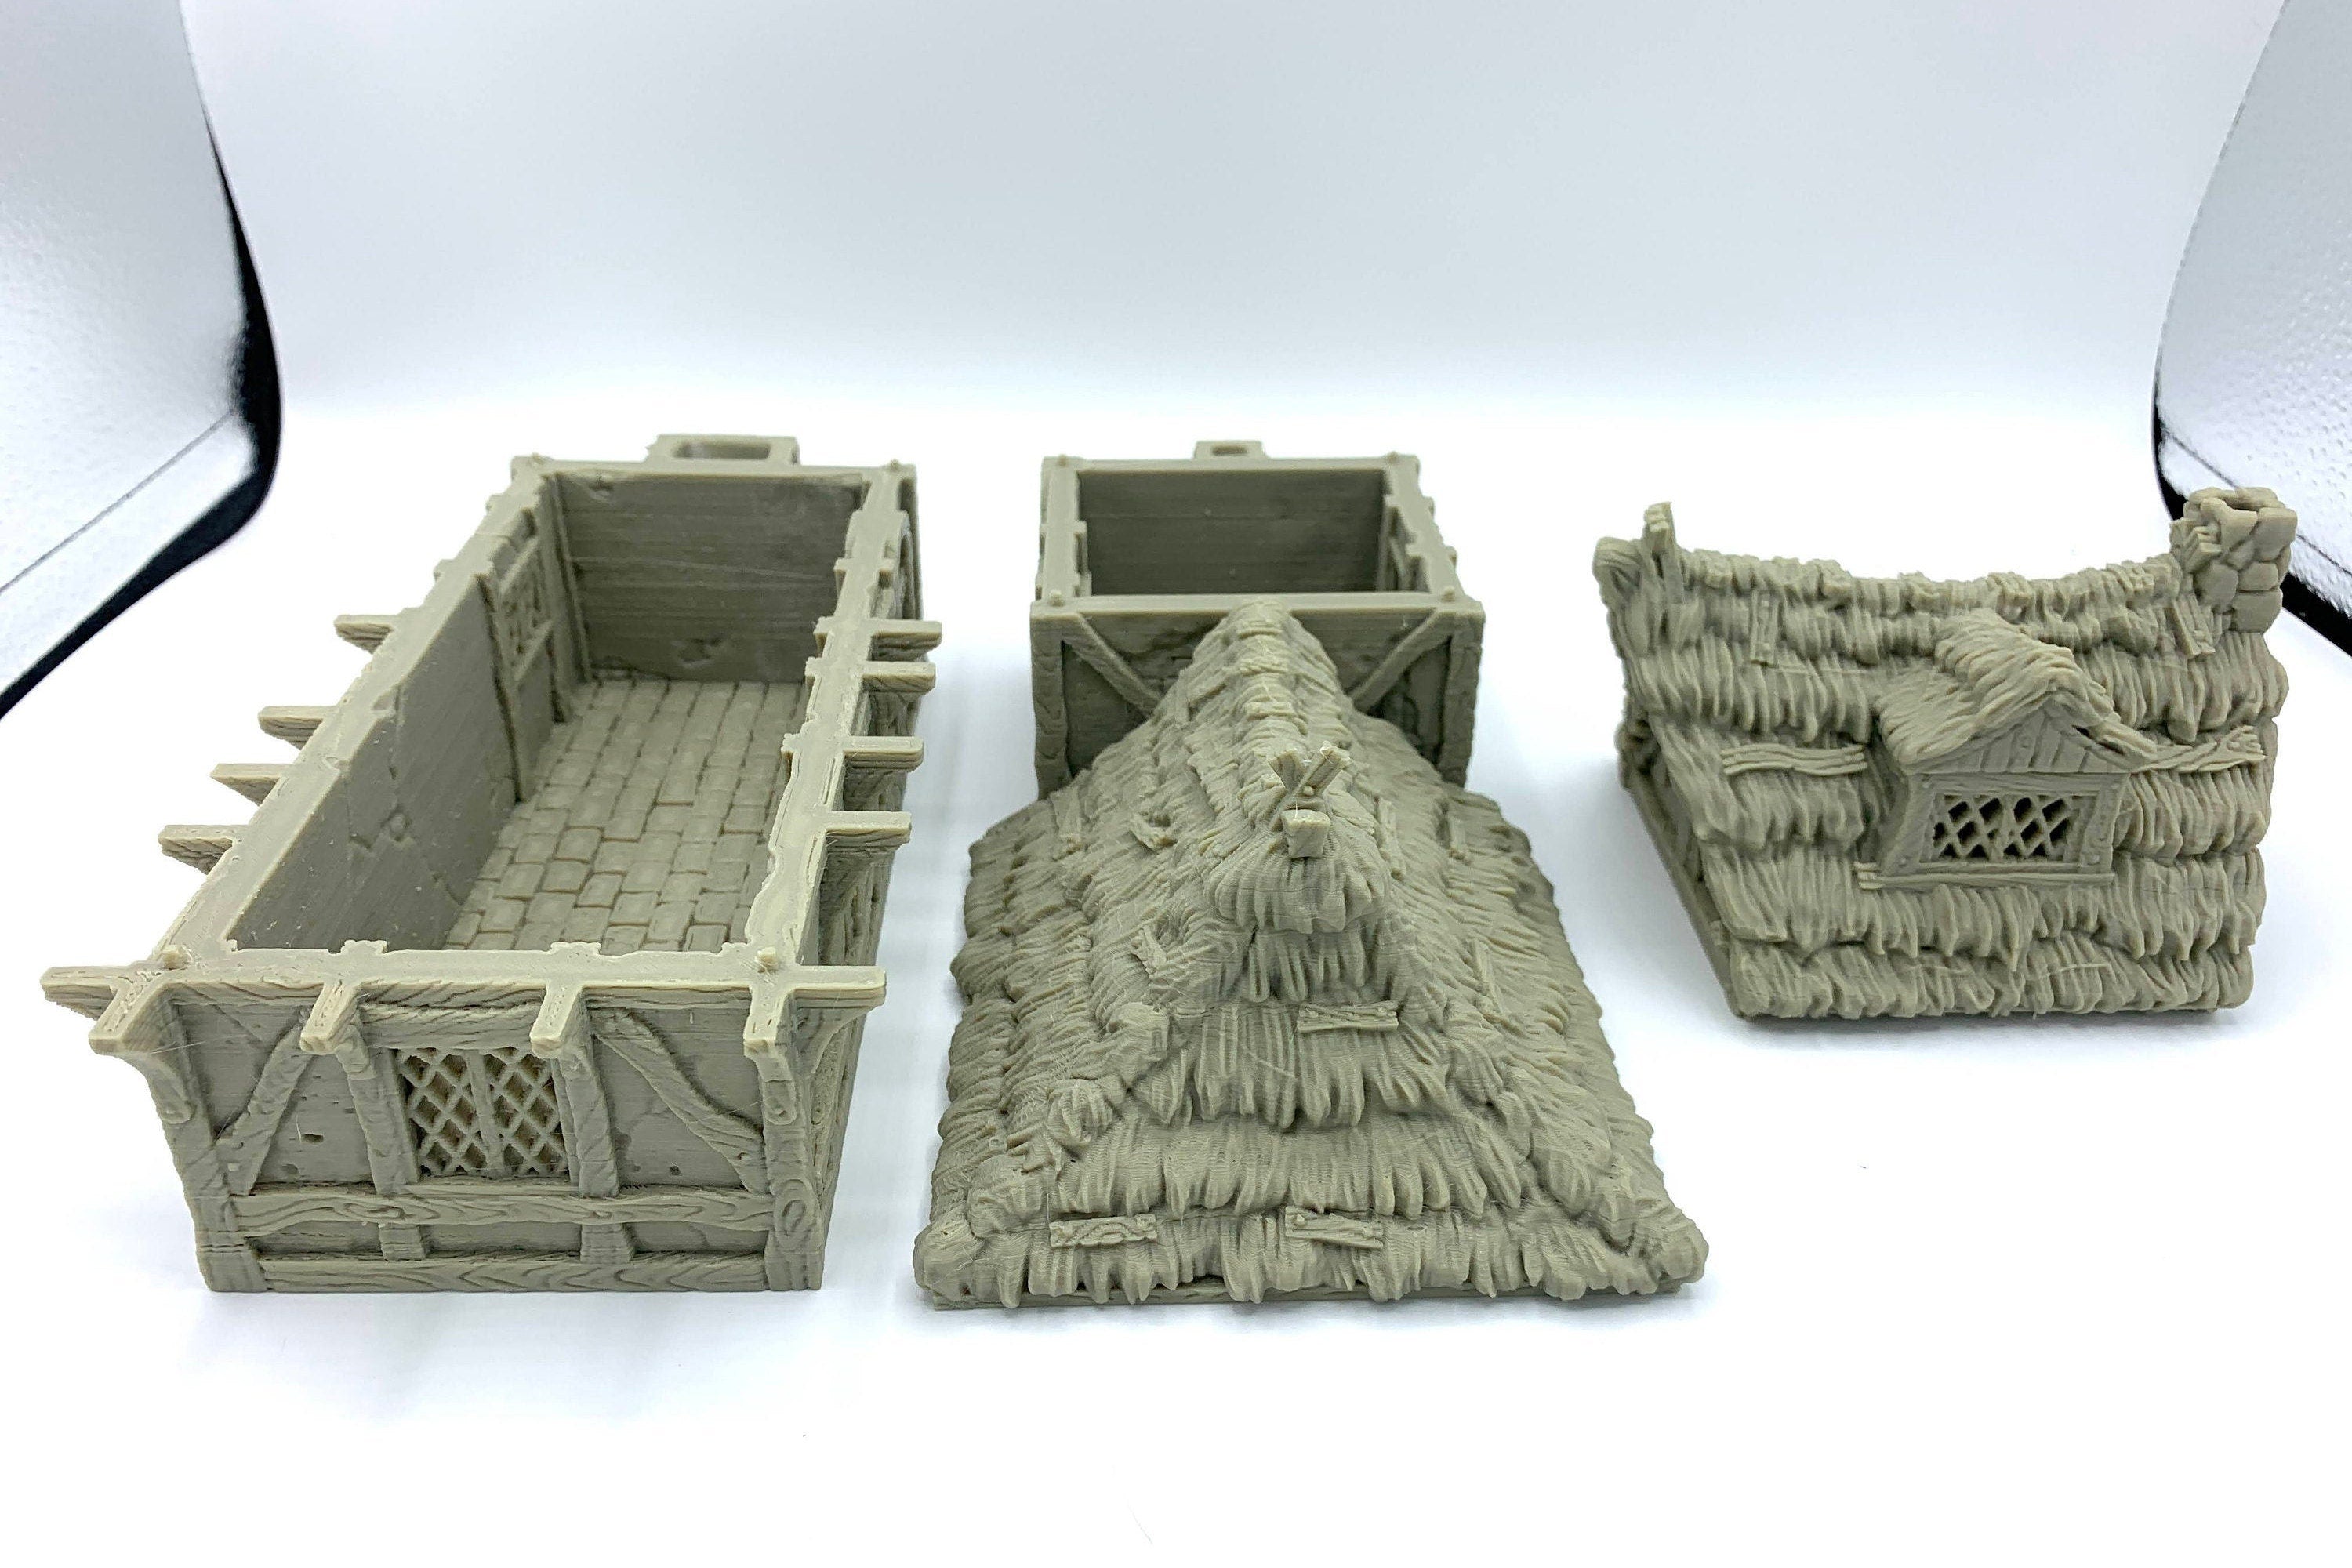 City Of Tarok - Medieval House 3 (Thatched Roof Version) / 28mm Wargame / RPG 3d Printed Tabletop Terrain